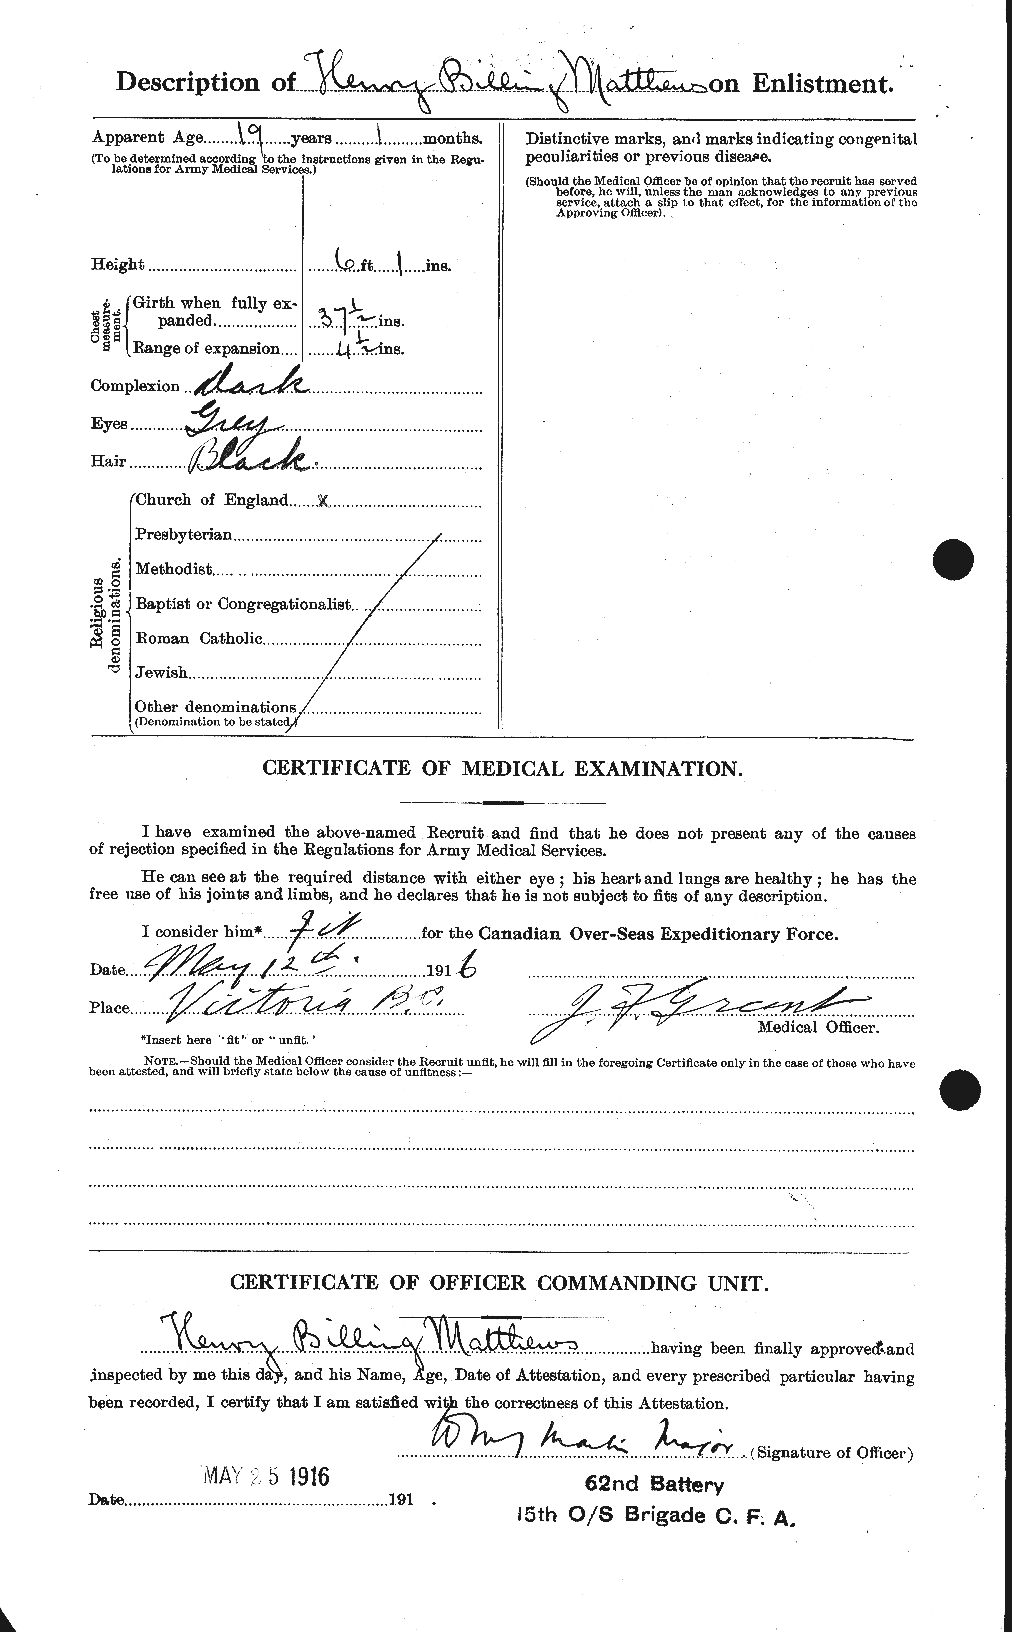 Personnel Records of the First World War - CEF 491172b